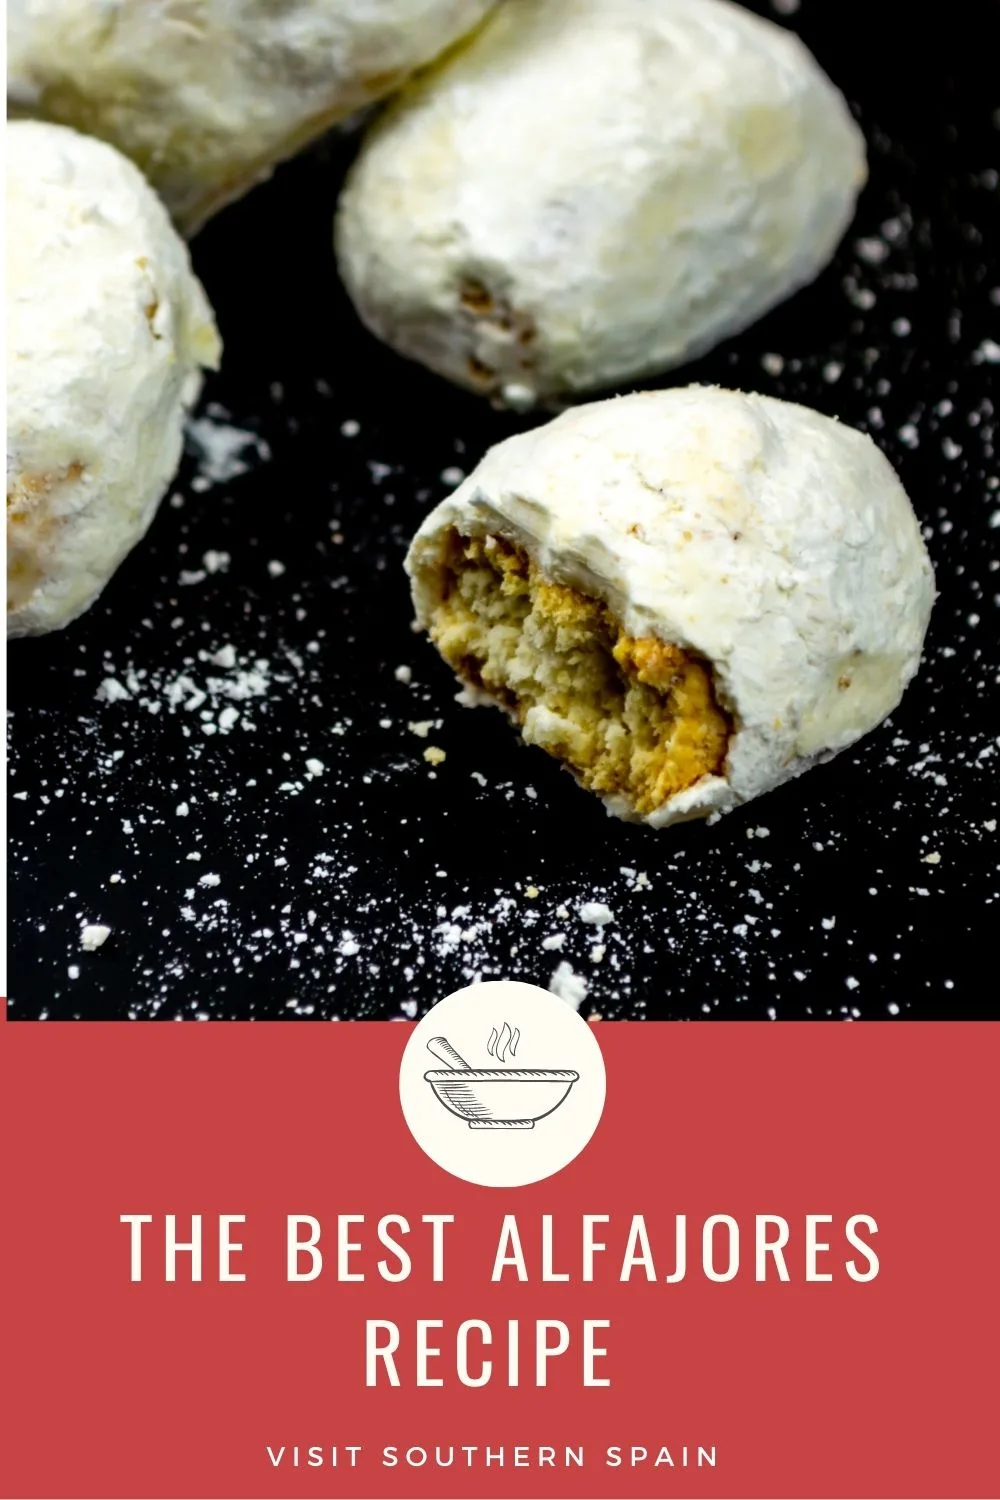 Want to try the best Alfajores recipe ever? The Alfajores recipe is the perfect choice if you want an irresistible dessert made in no time. This easy alfajores recipe requires no baking and is made out of nuts and spices which gives them a unique flavor. These Spanish cookies can be found in stores all over Andalucia, from where they originate. You can try our recipe for alfajores and treat yourself with these yummy goodies. #alfajores #alfajoresrecipe #andalucianalfajores #spanishcookies